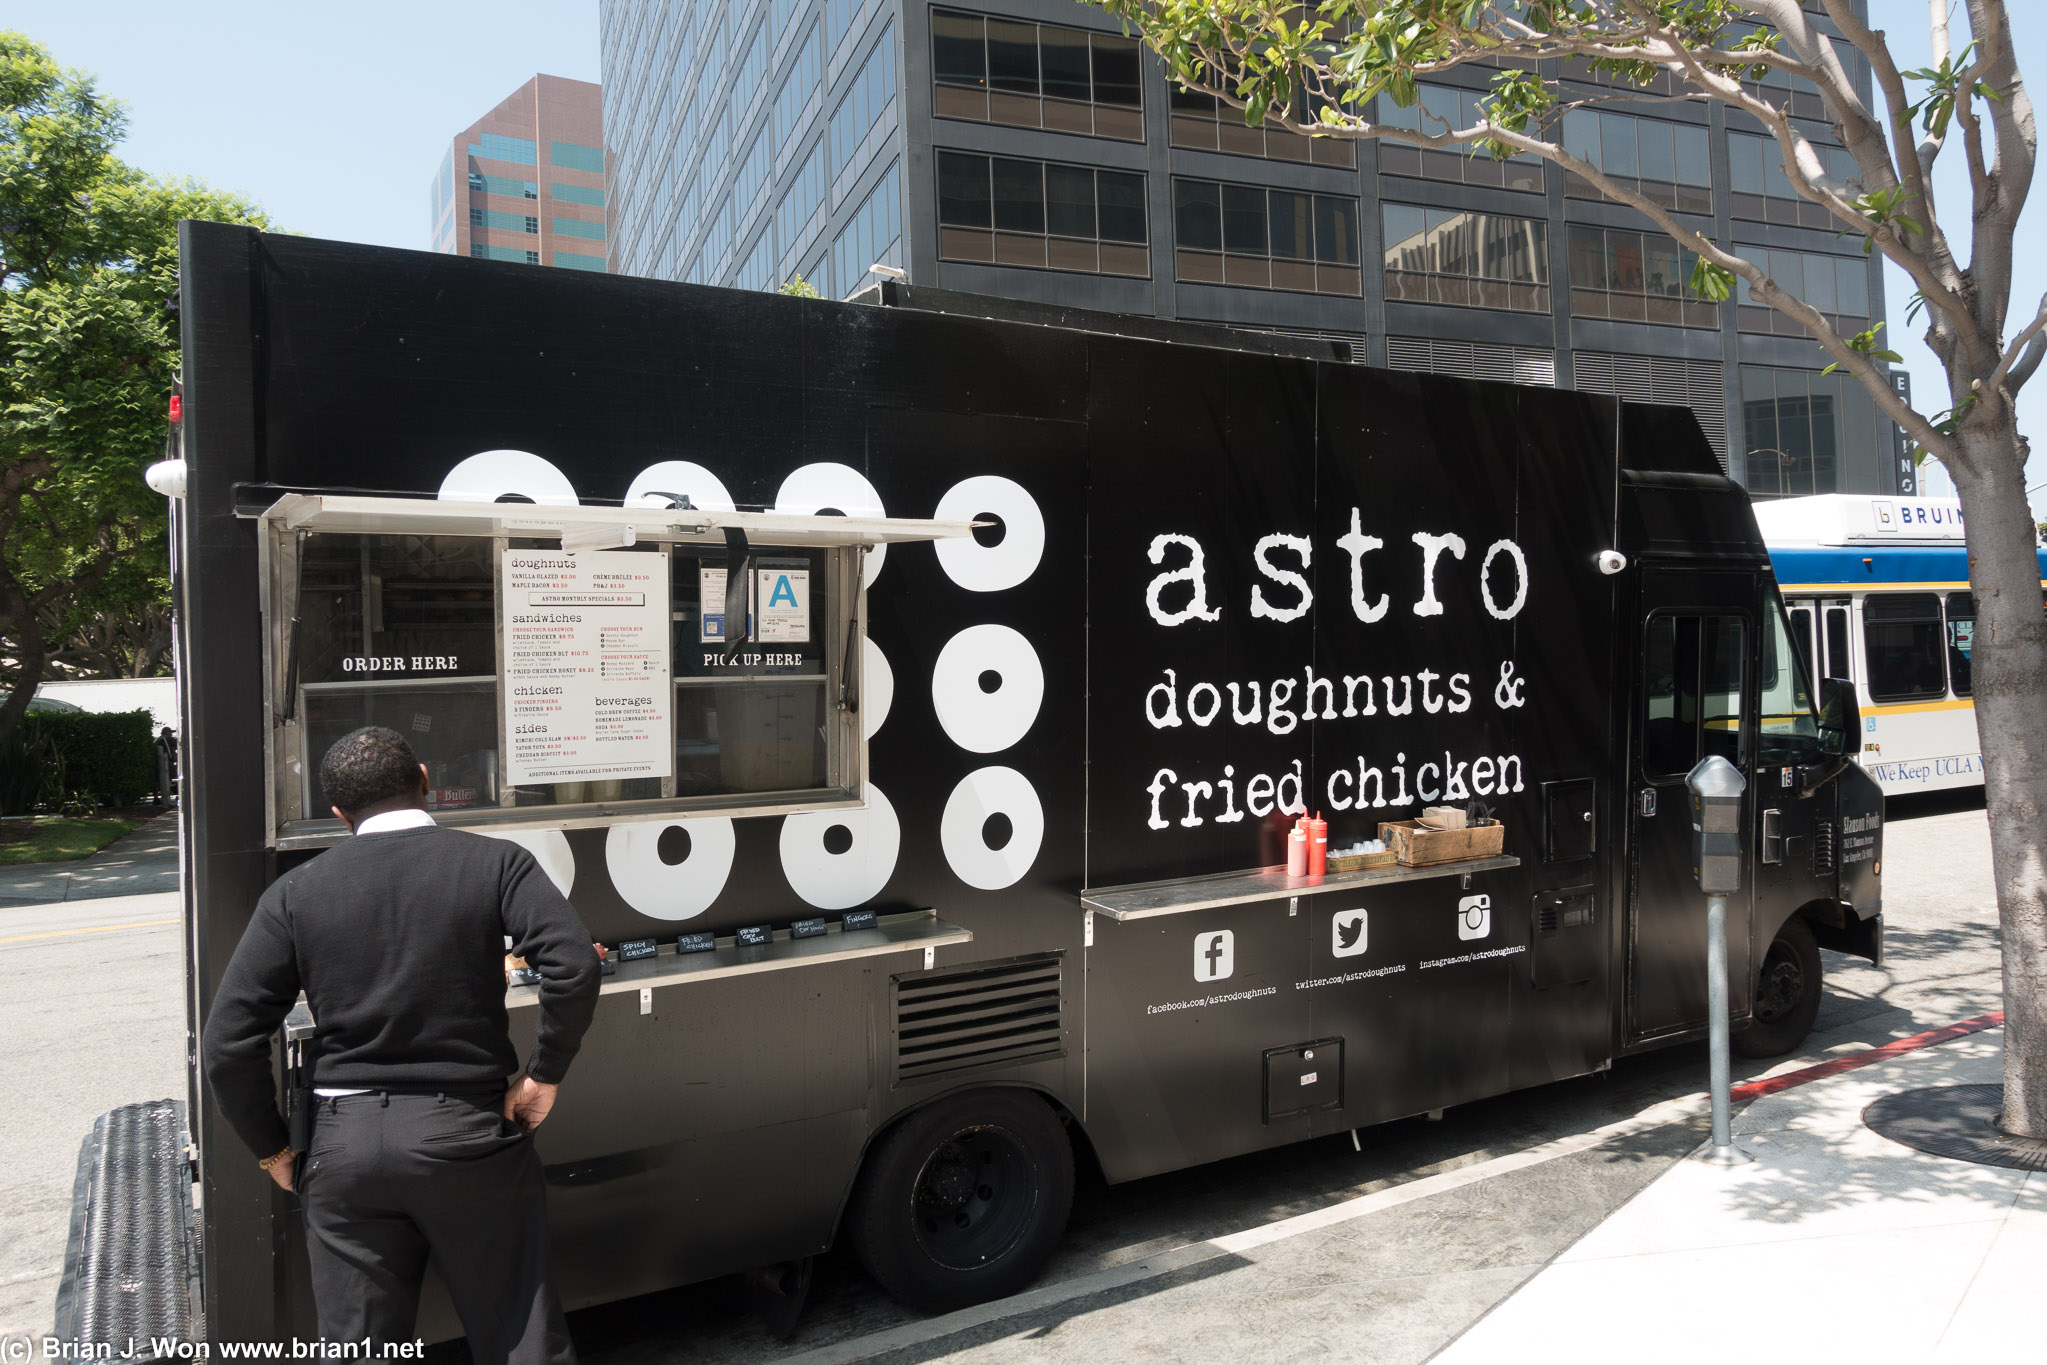 Checking out the Astro Doughnuts food truck.